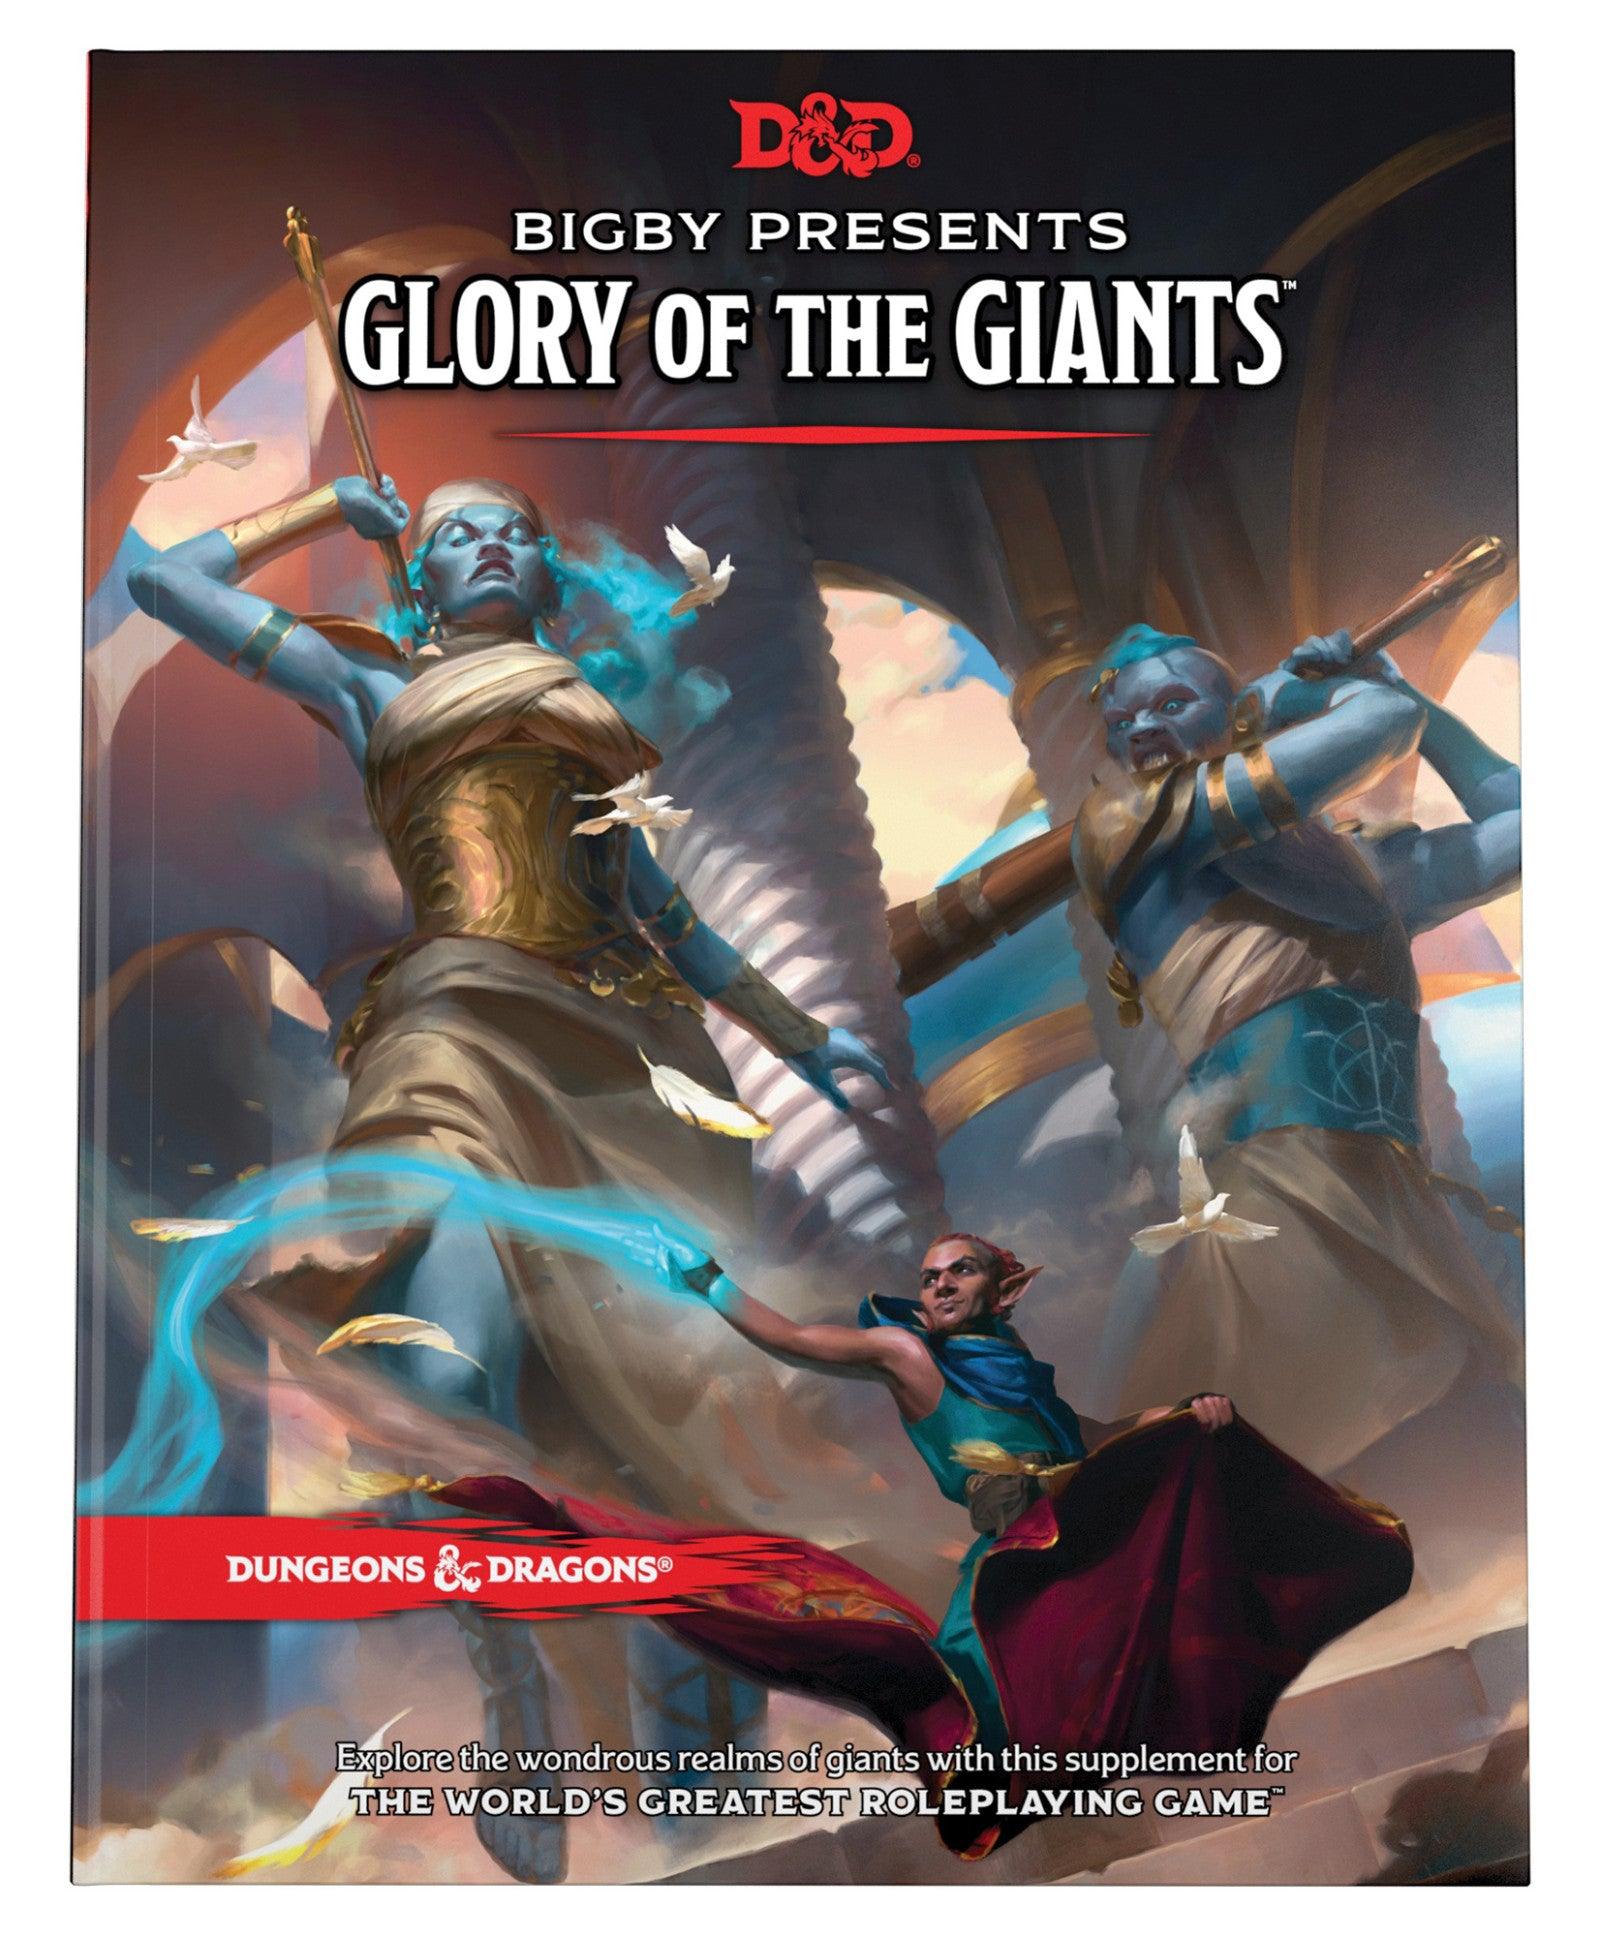 D&D Dungeon & Dragons Bigby Presents Glory of the Giants Hardcover